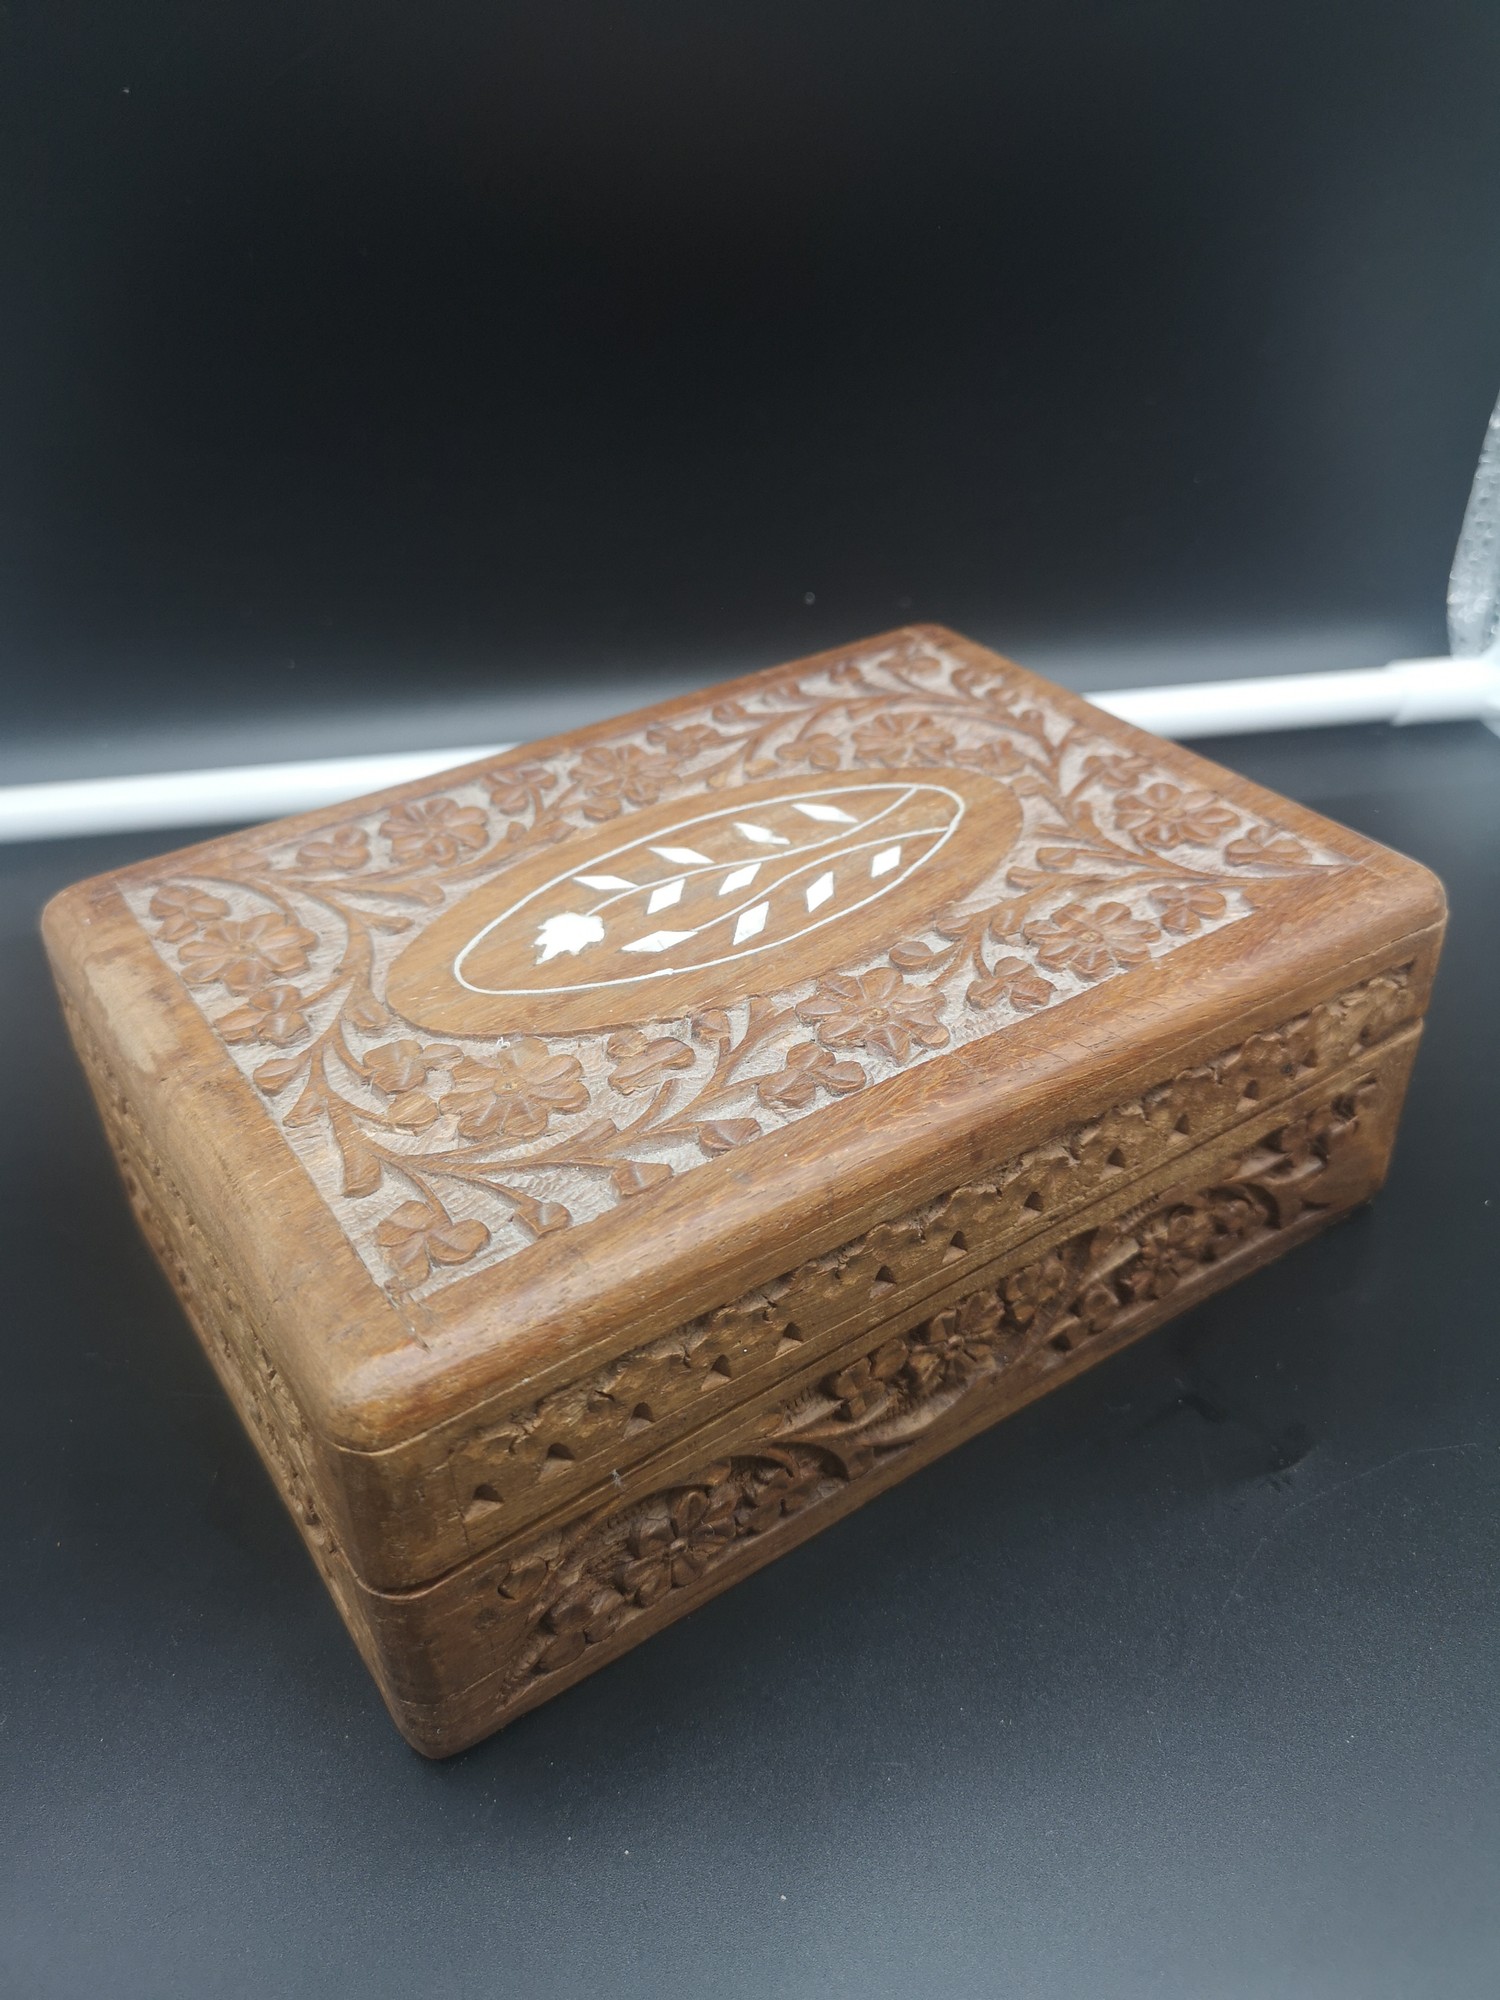 Carved box of jewellery. - Image 2 of 2